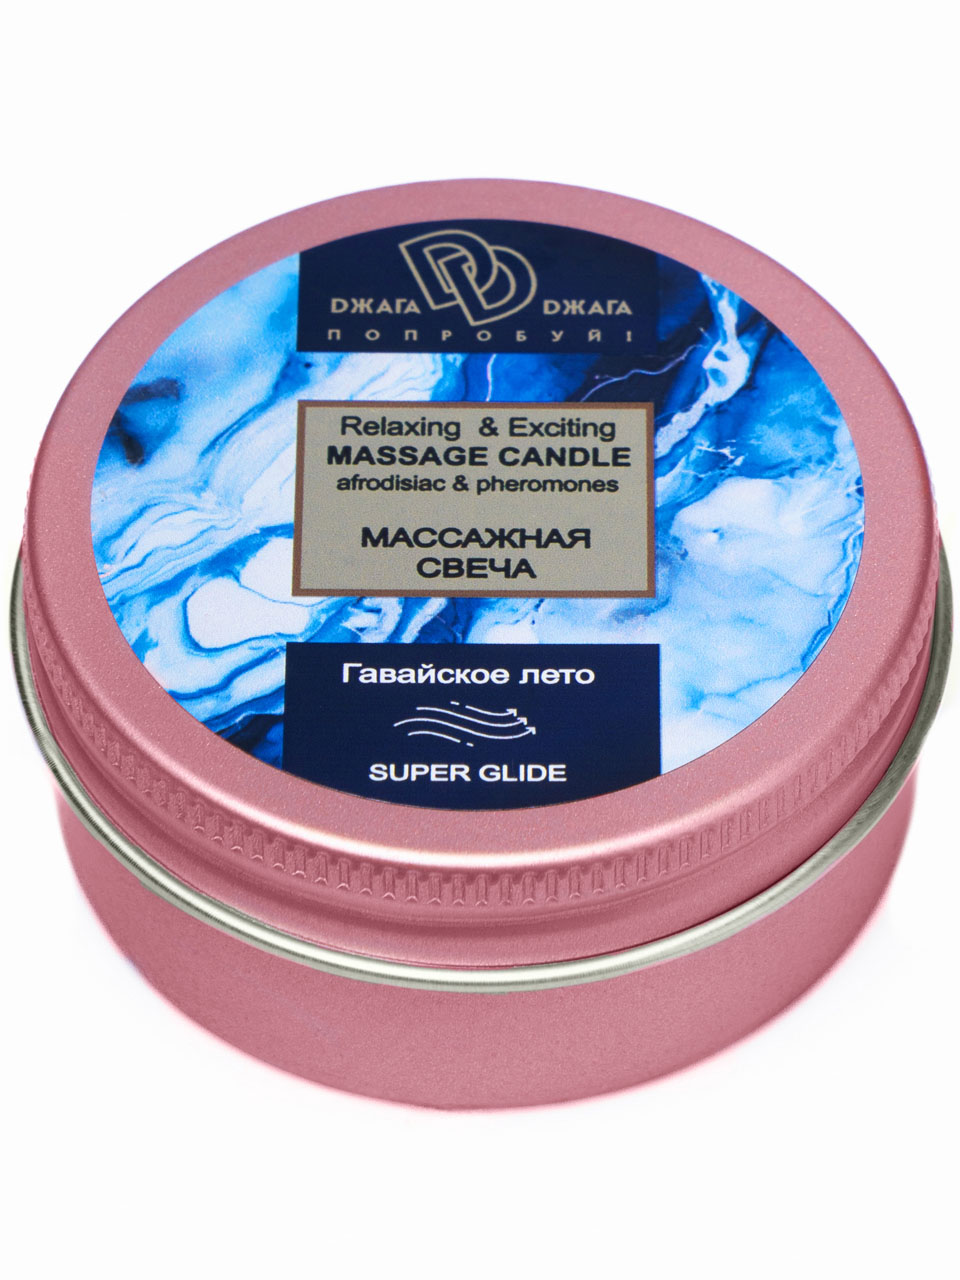   Relaxing & Exciting Massage Candle   2 .  15 